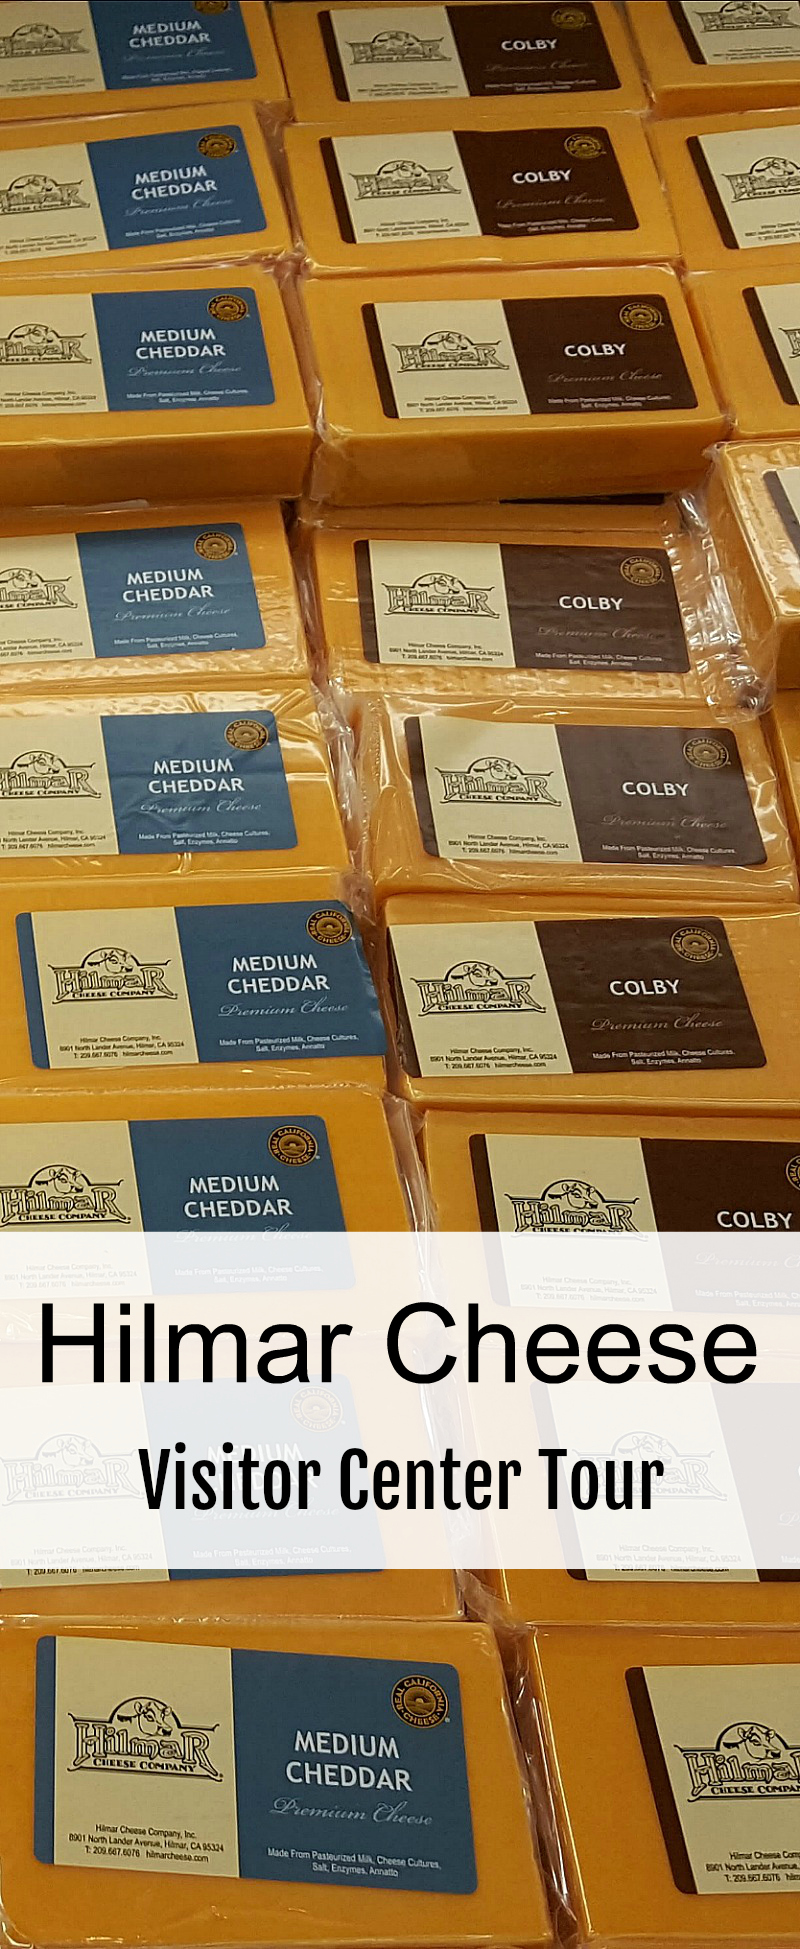 Hilmar Cheese Tour Visitor Center and Cafe